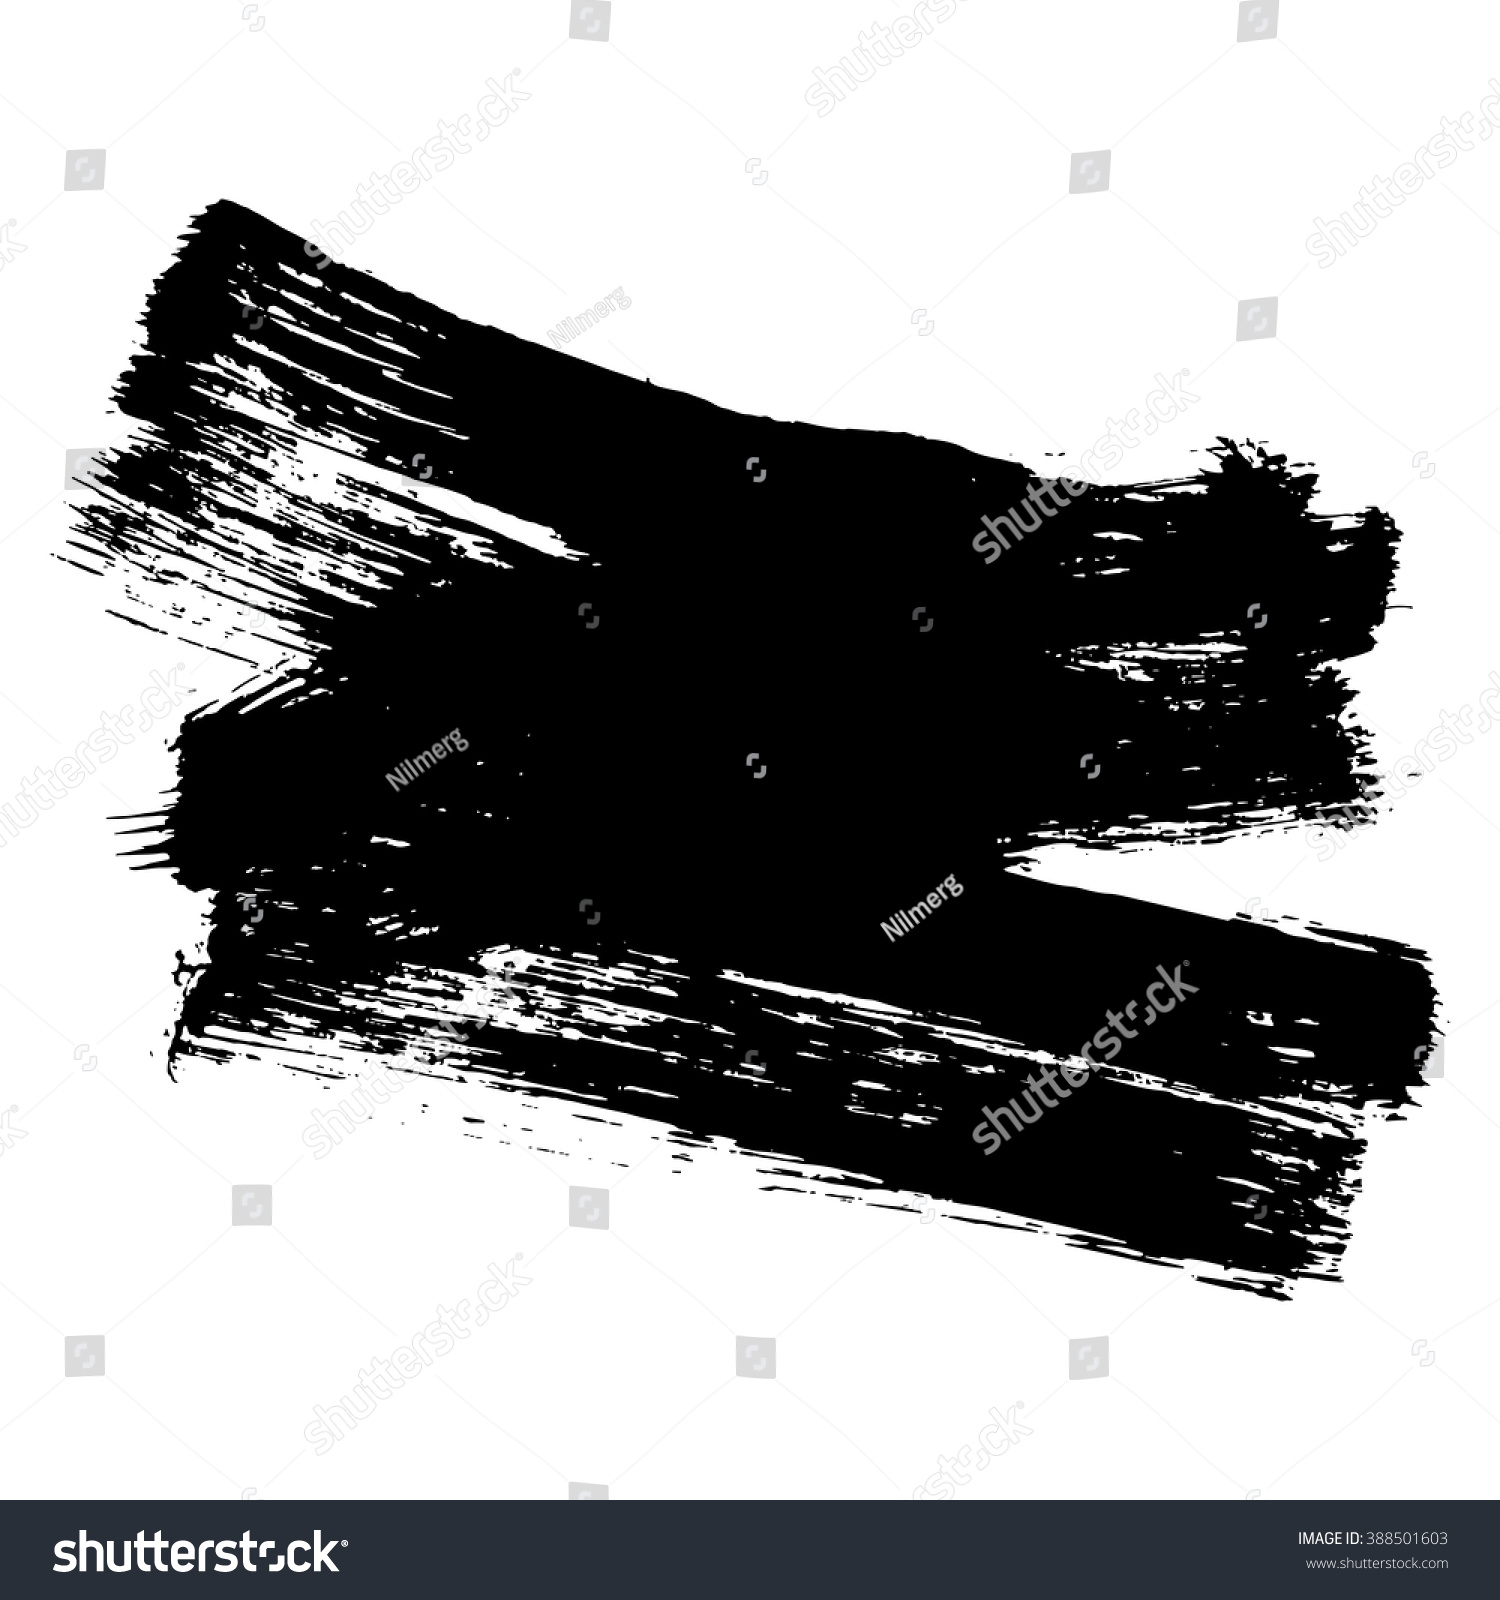 Grunge Black Abstract Textured Square Vector Stock Vector 388501603 ...